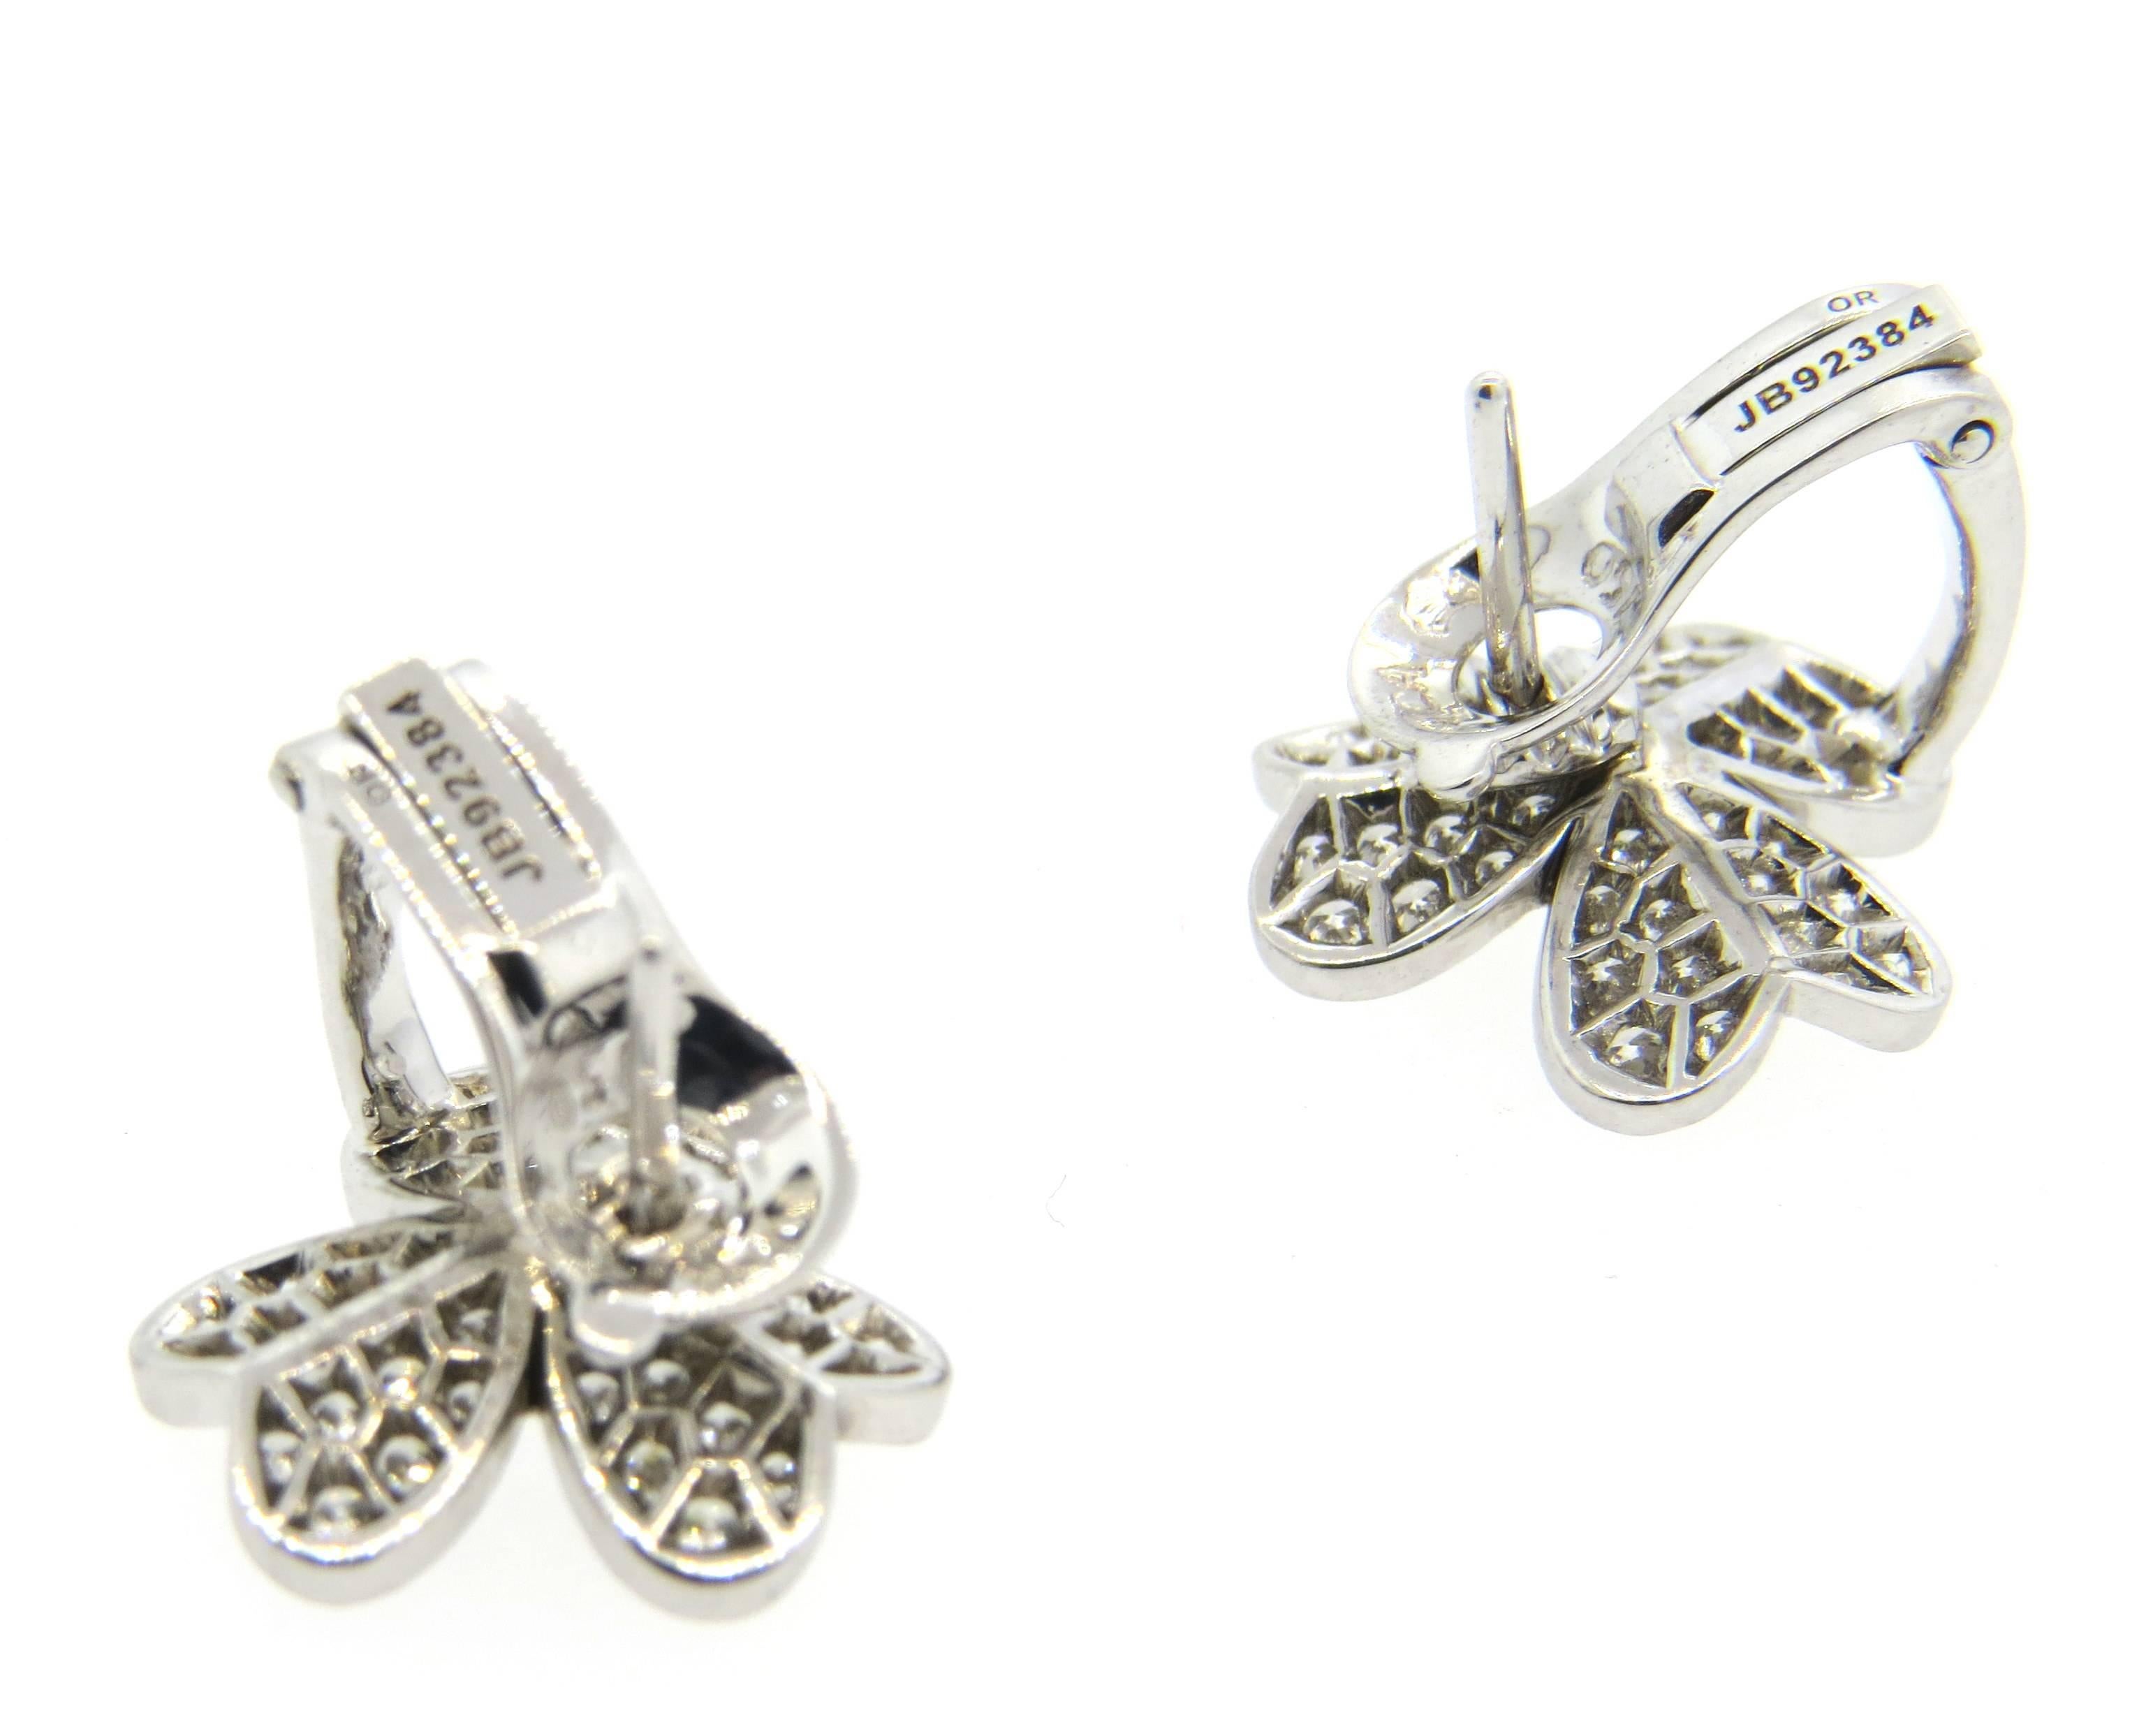 Gorgeous 18k white gold flower earrings, crafted by Van Cleef & Arpels for delicate Frivole collection,  set with 1.61ctw in VVS/FG diamonds. Earrings measure 15mm x 14mm. Marked JB 92384, OR VCA, 750. Weight - 6.7 grams
Current retail $16900
Come